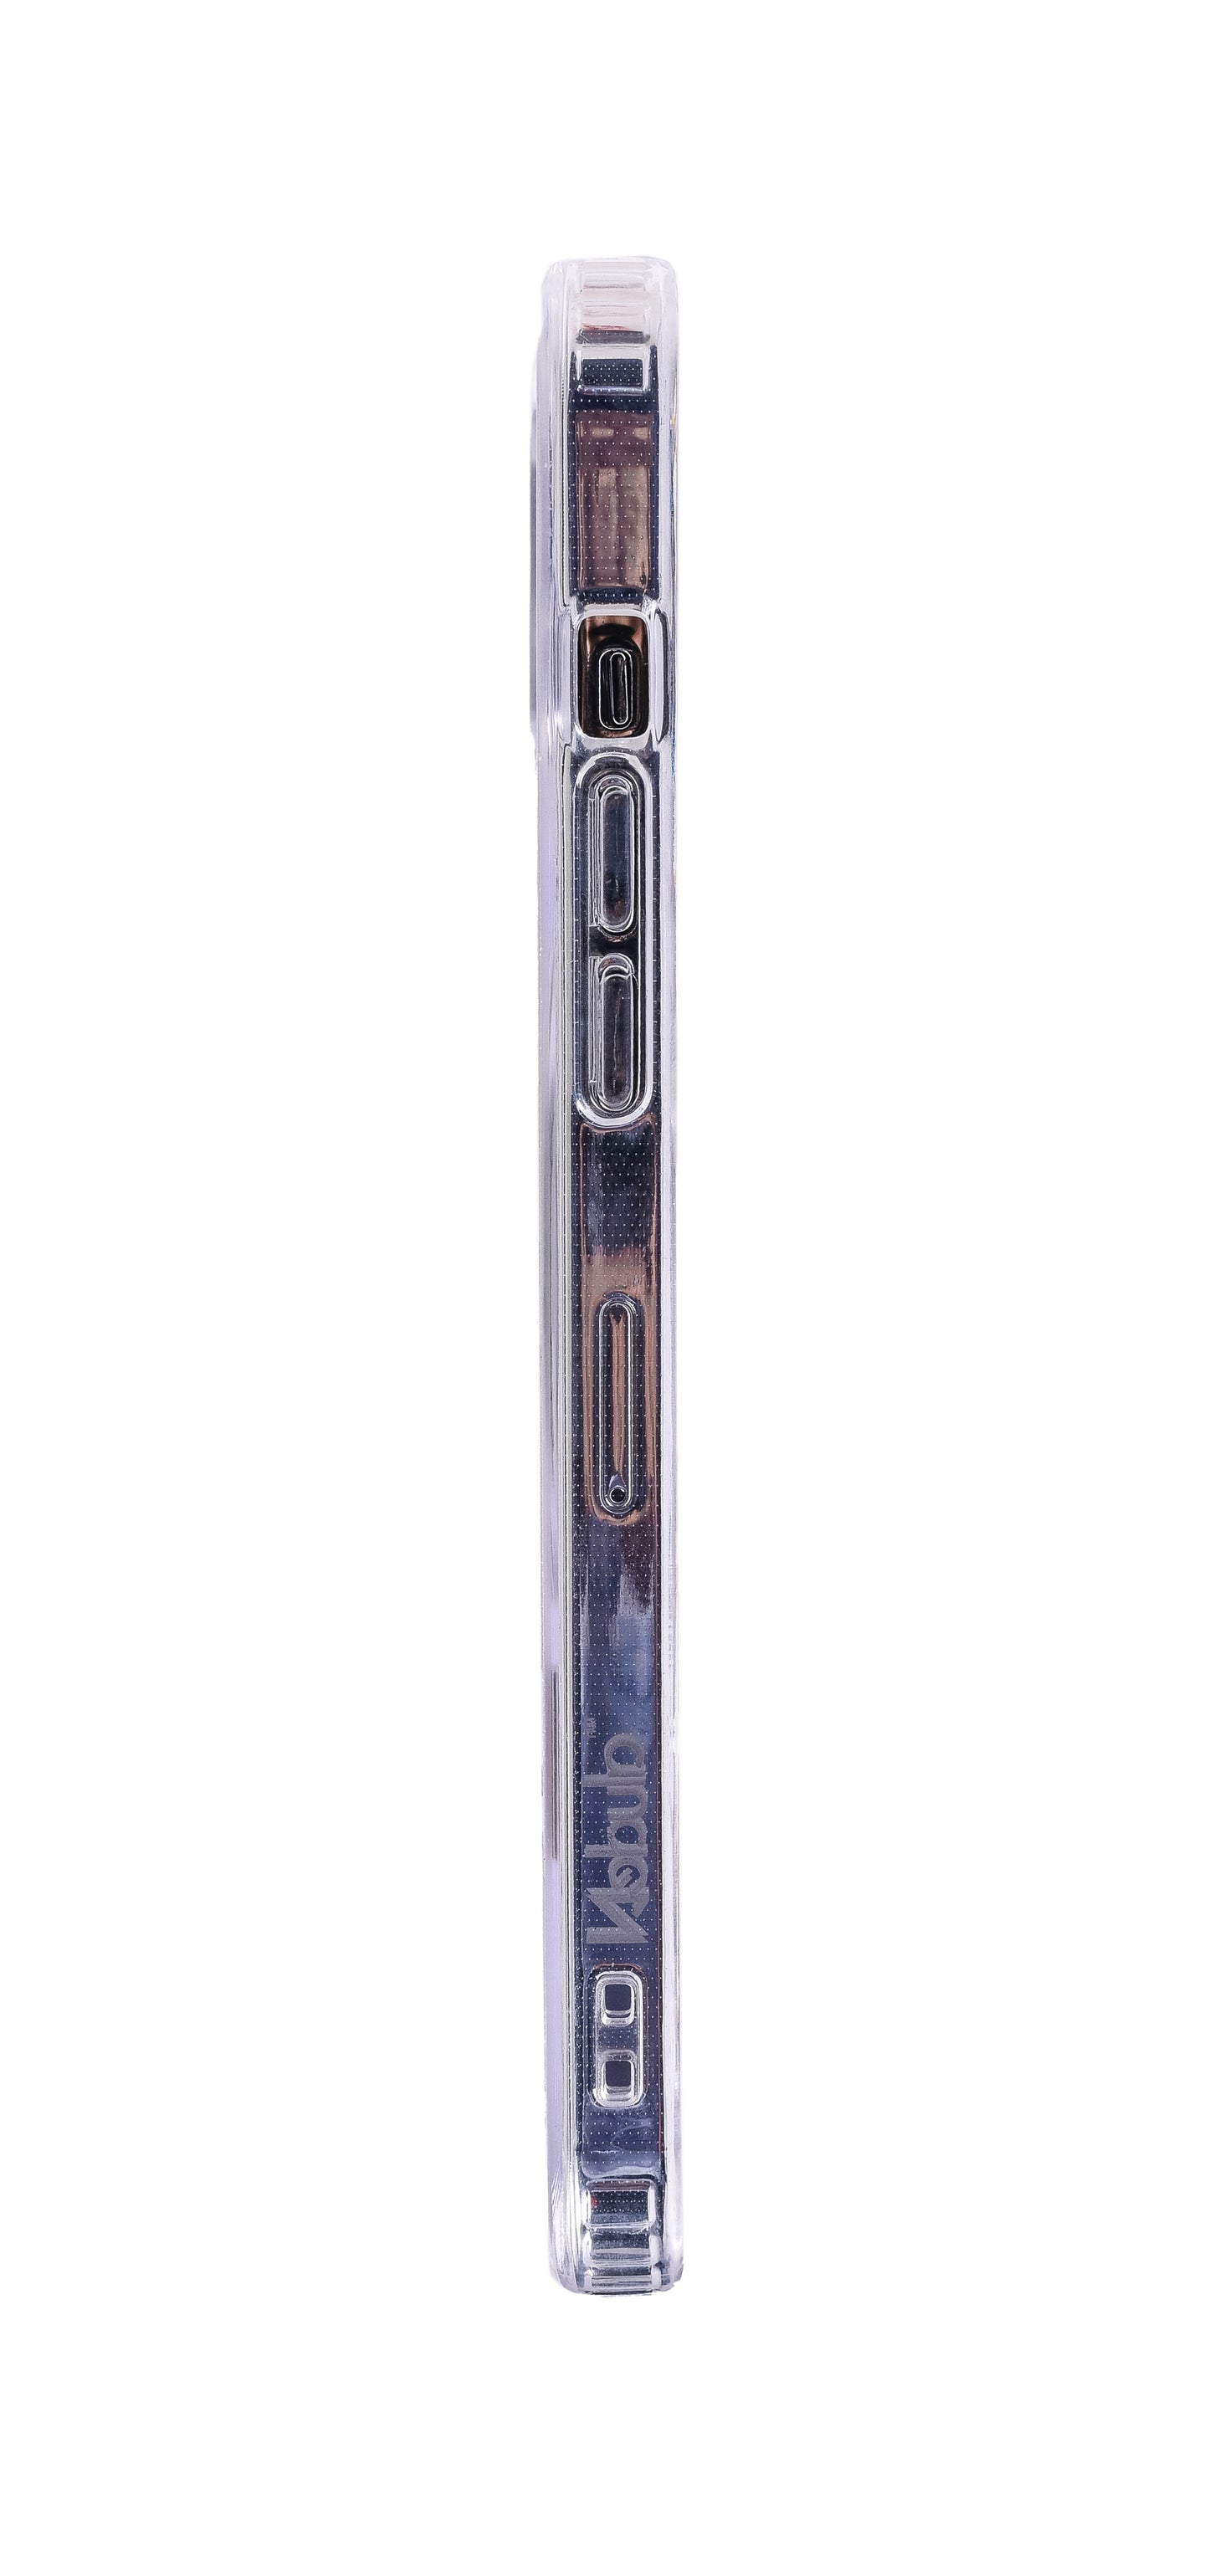 Nebula™ Clear Case with MagSafe  - iPhone Case